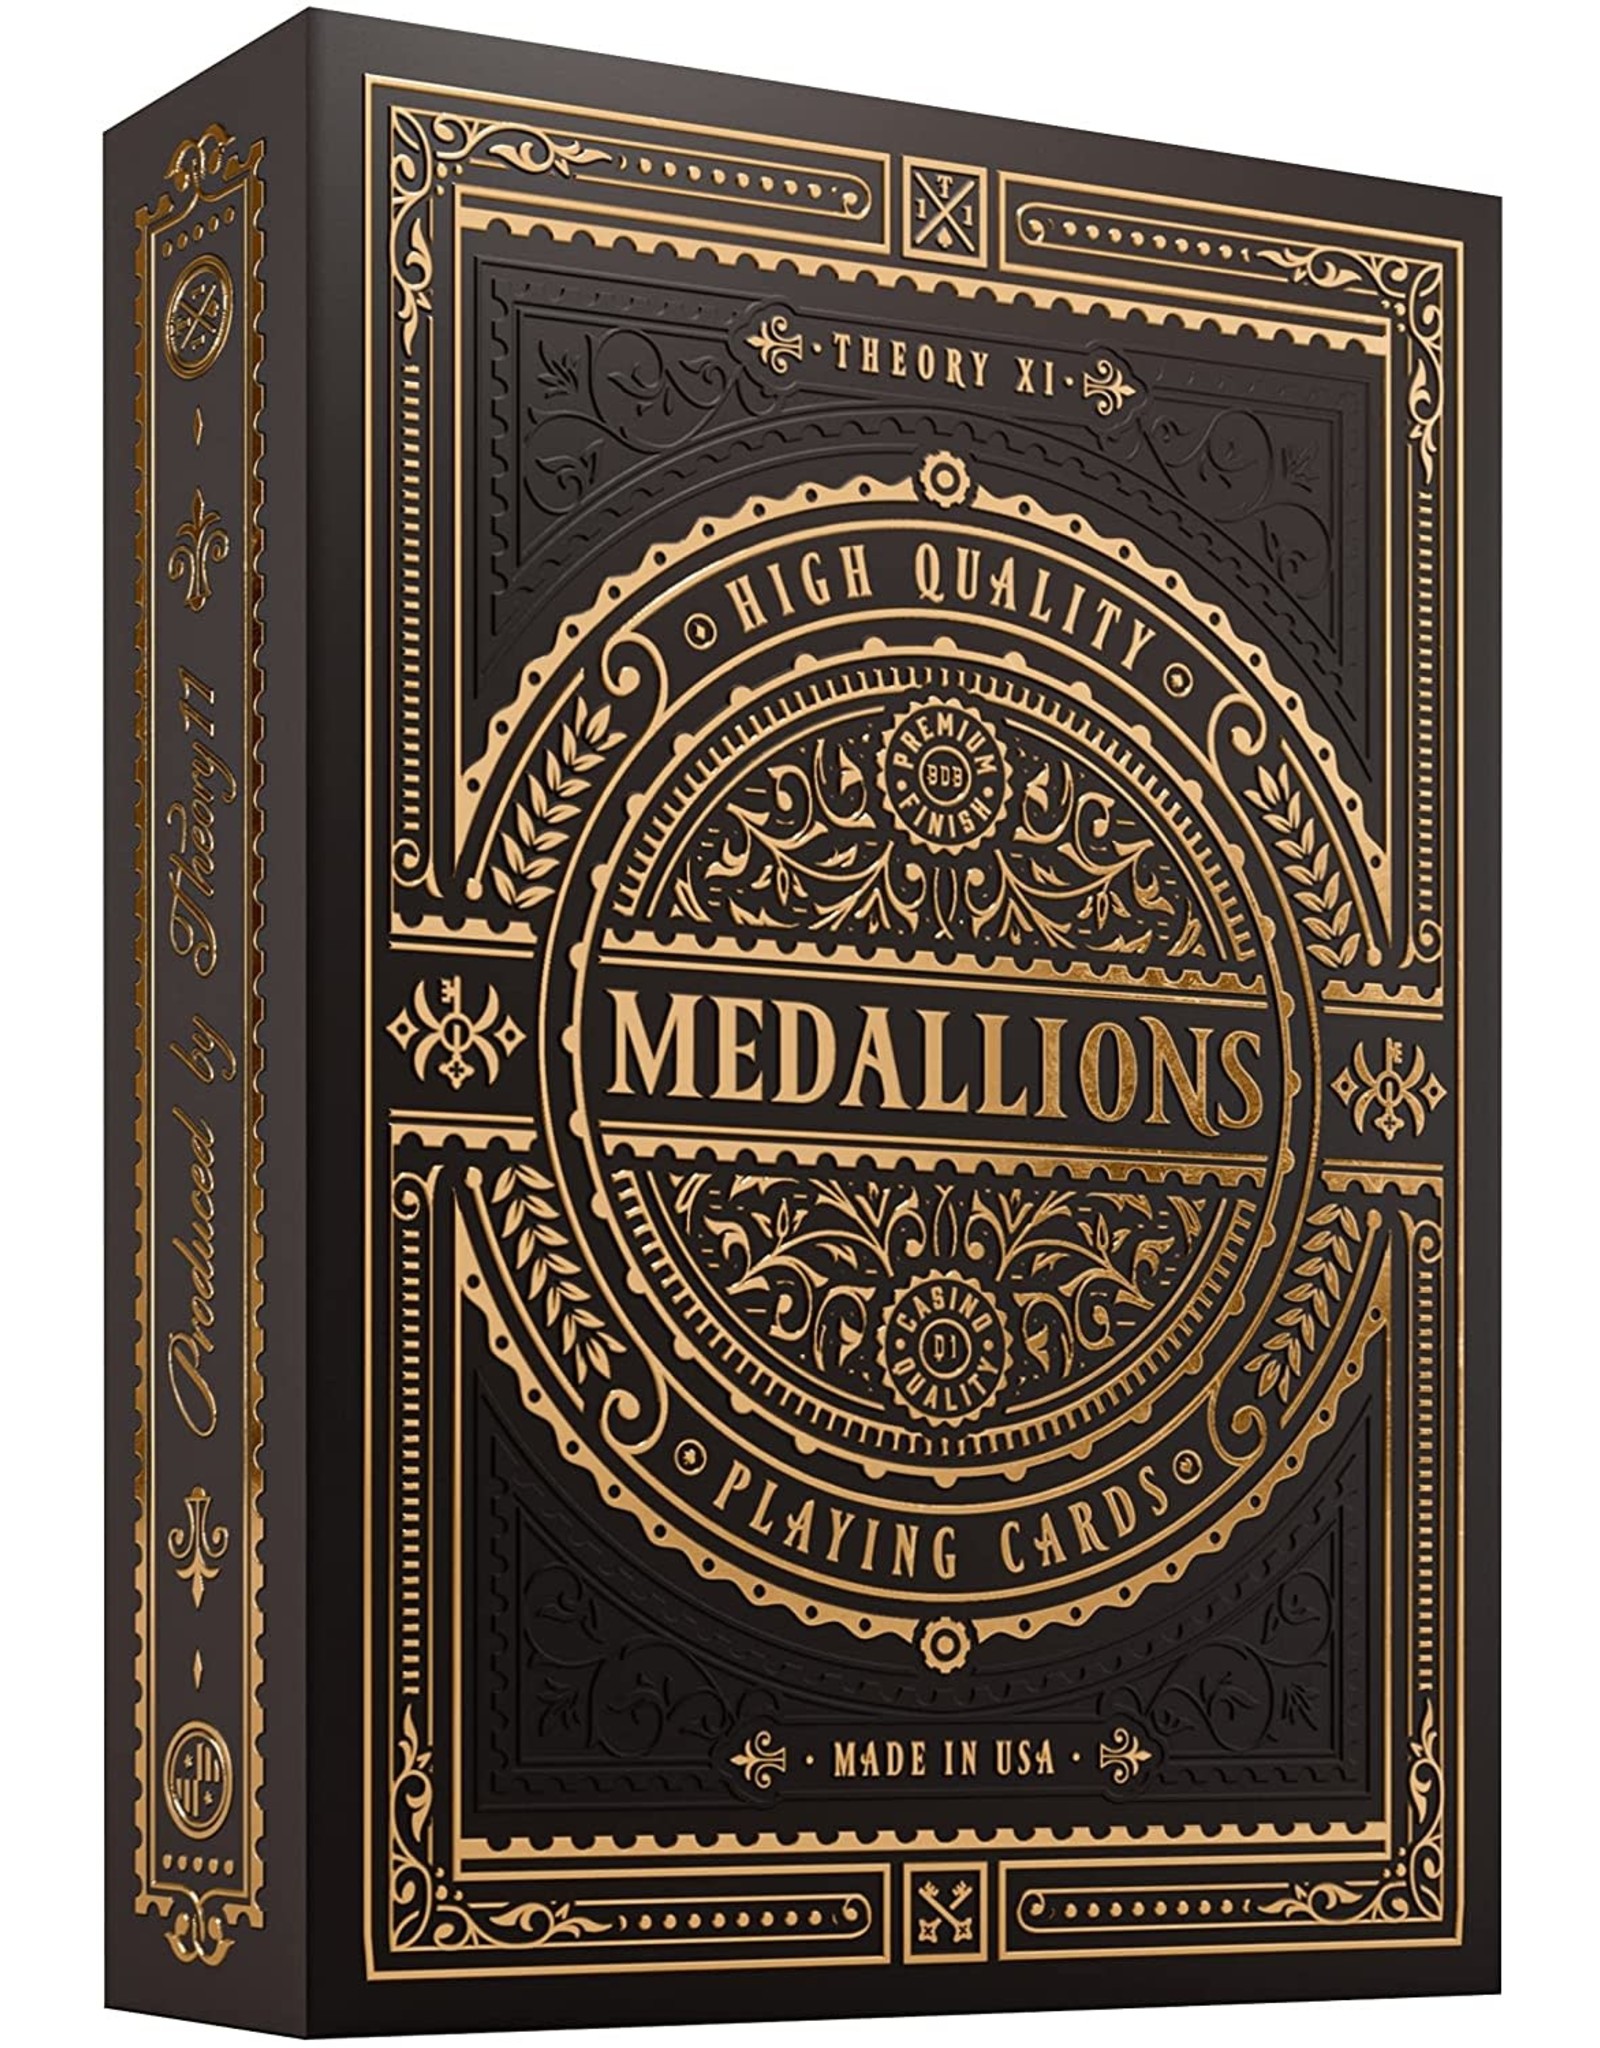 Theory 11 Playing Cards: Medallions